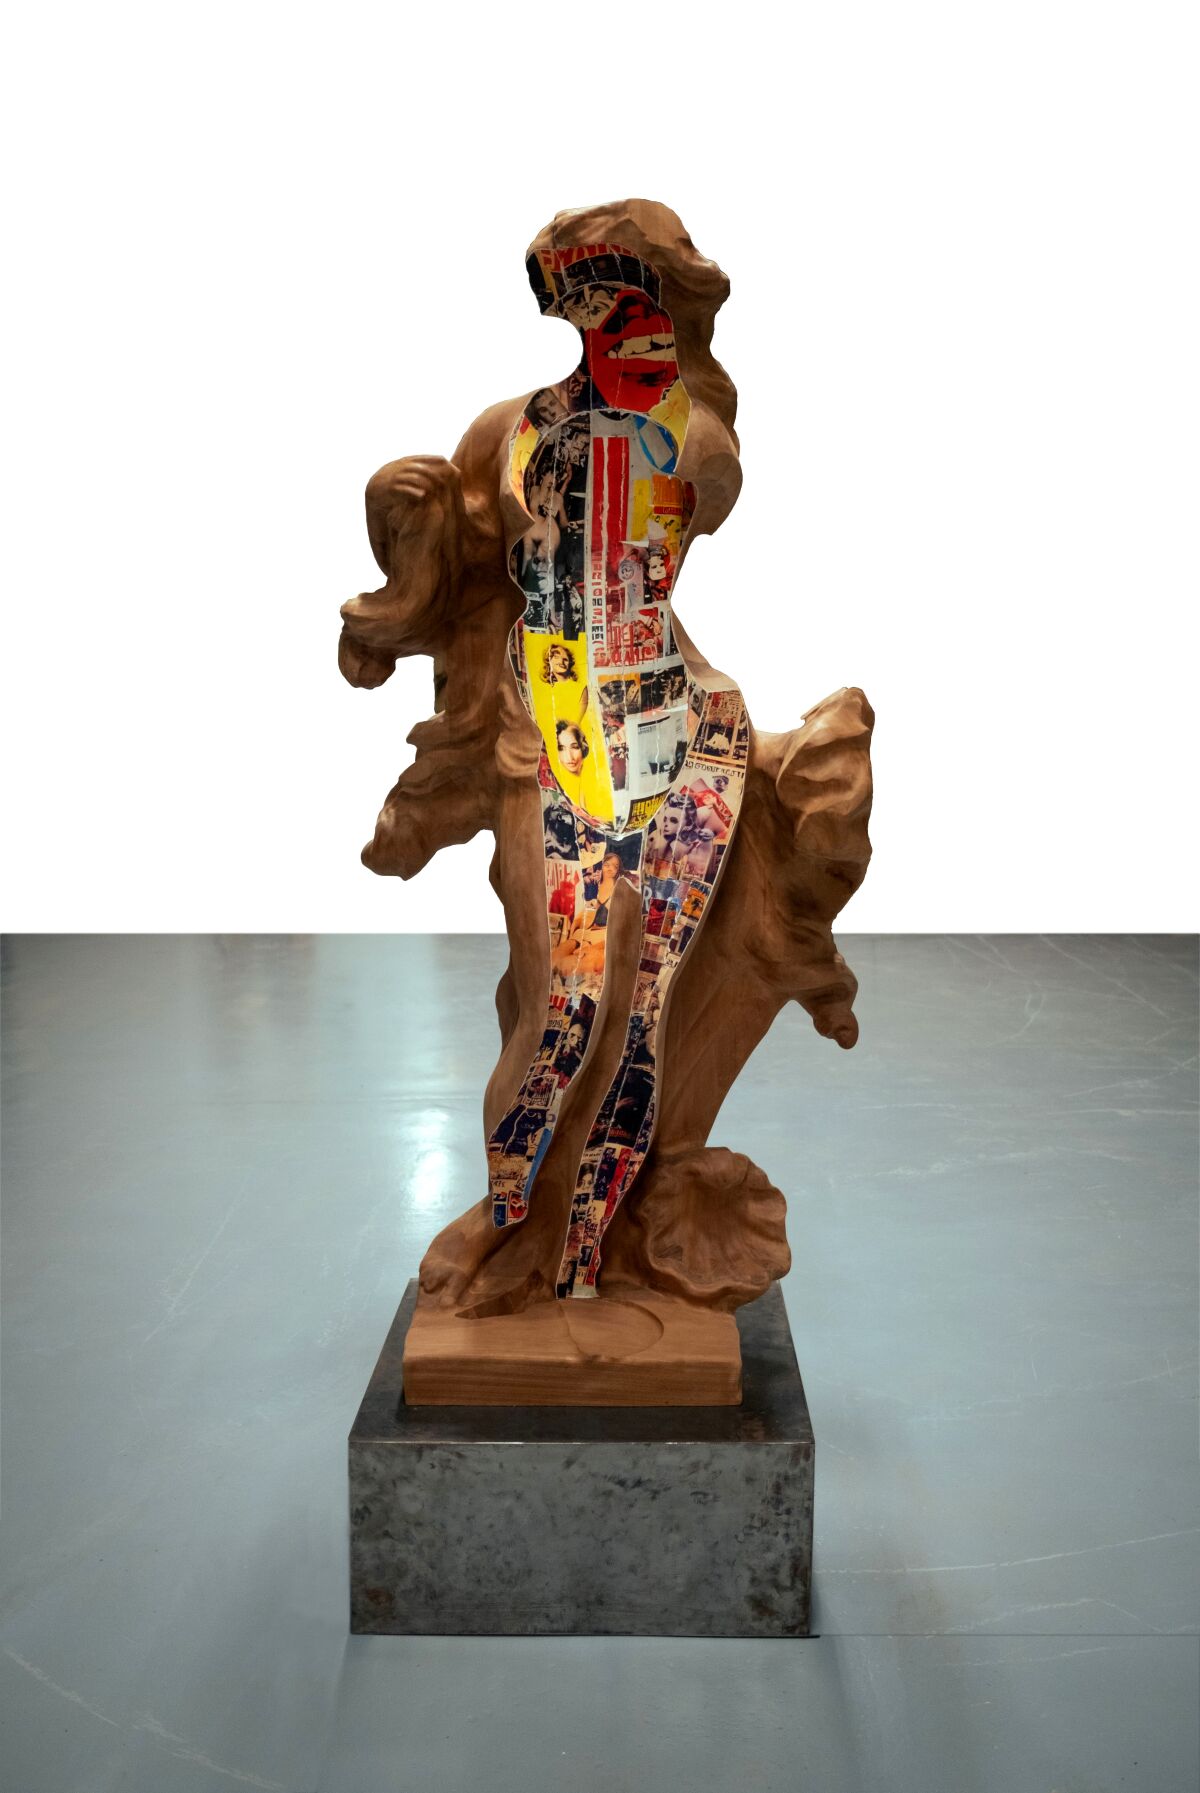 A wood sculpture of a female-looking figure on a pedestal.